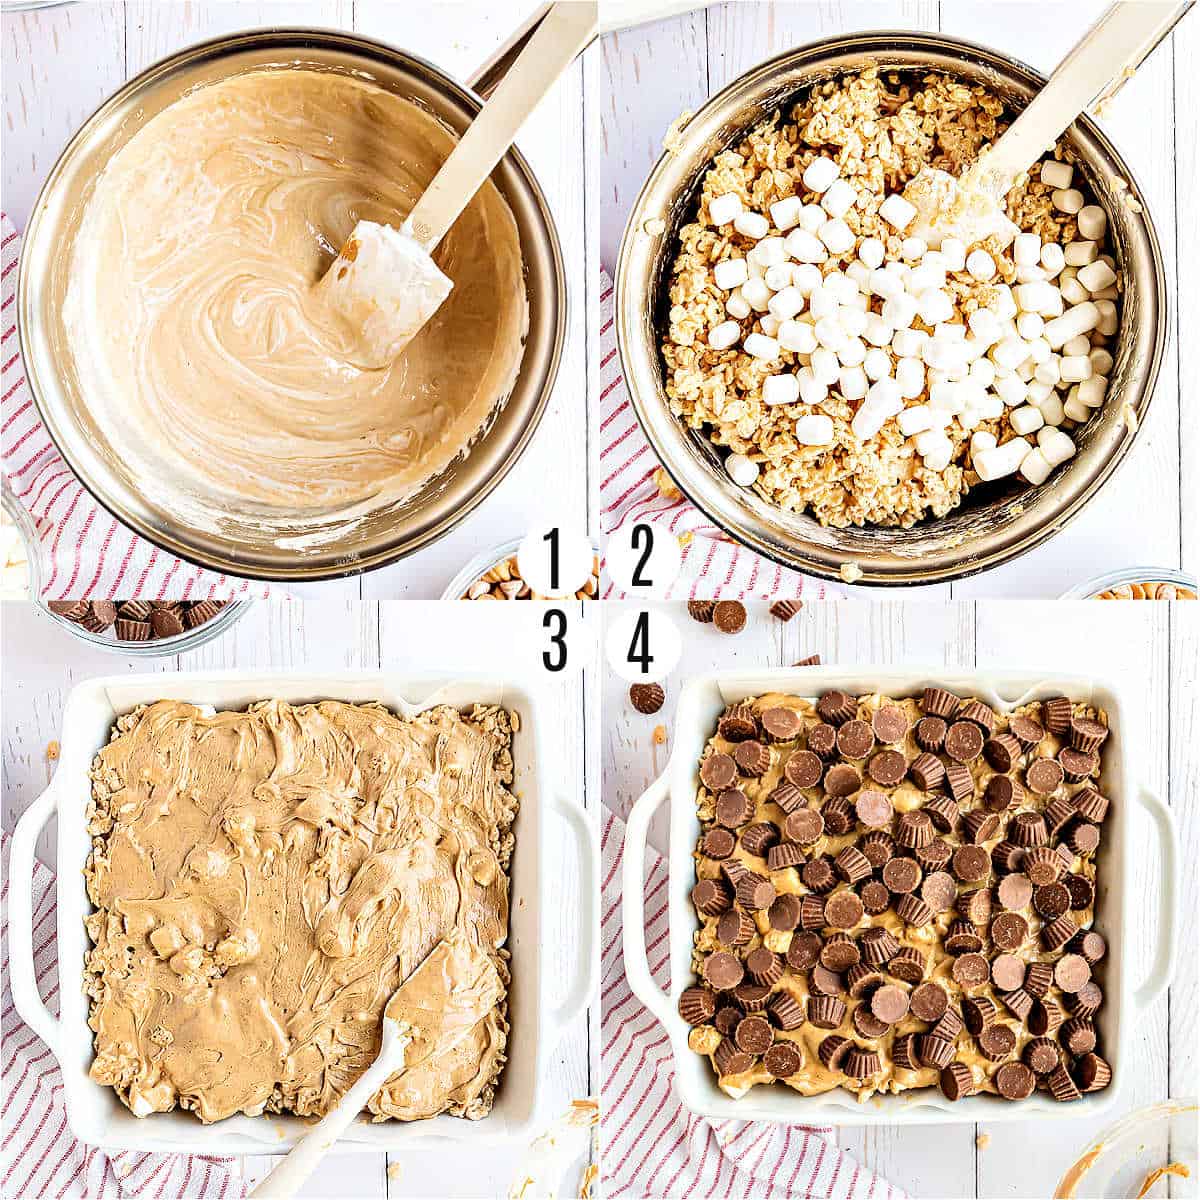 Step by step photos showing how to make peanut butter krispie treats.